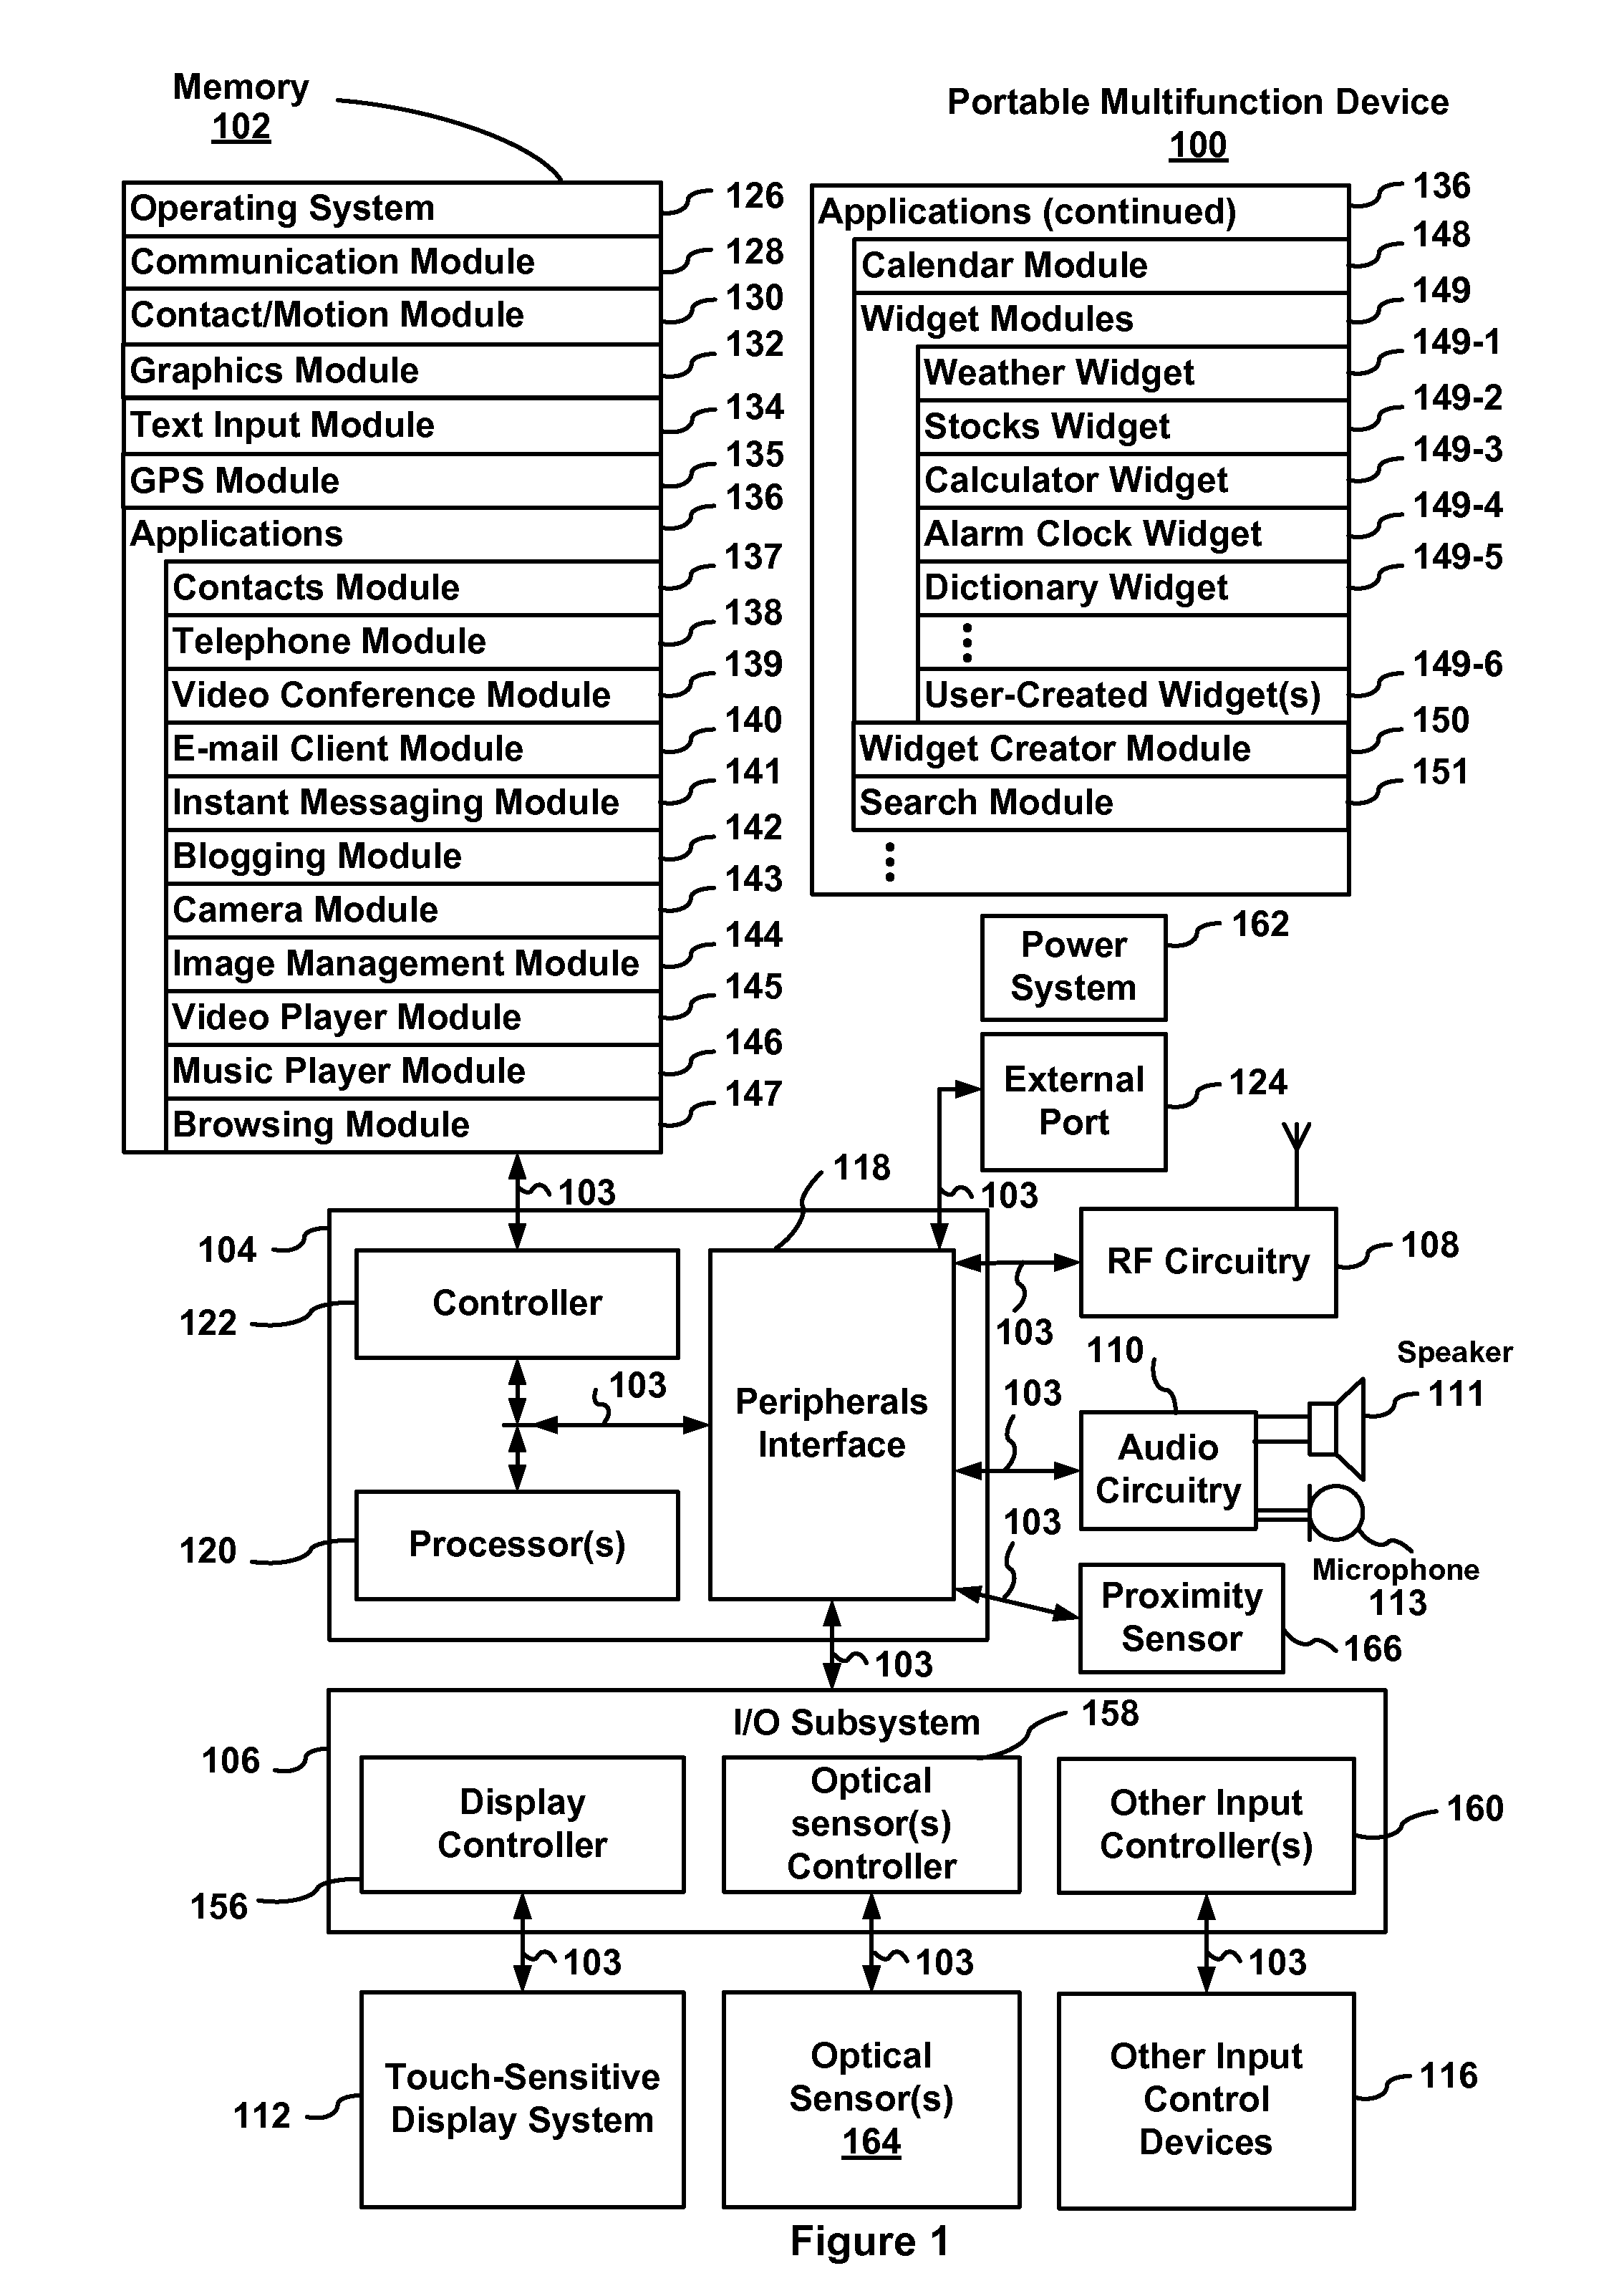 Soft Keyboard Display for a Portable Multifunction Device